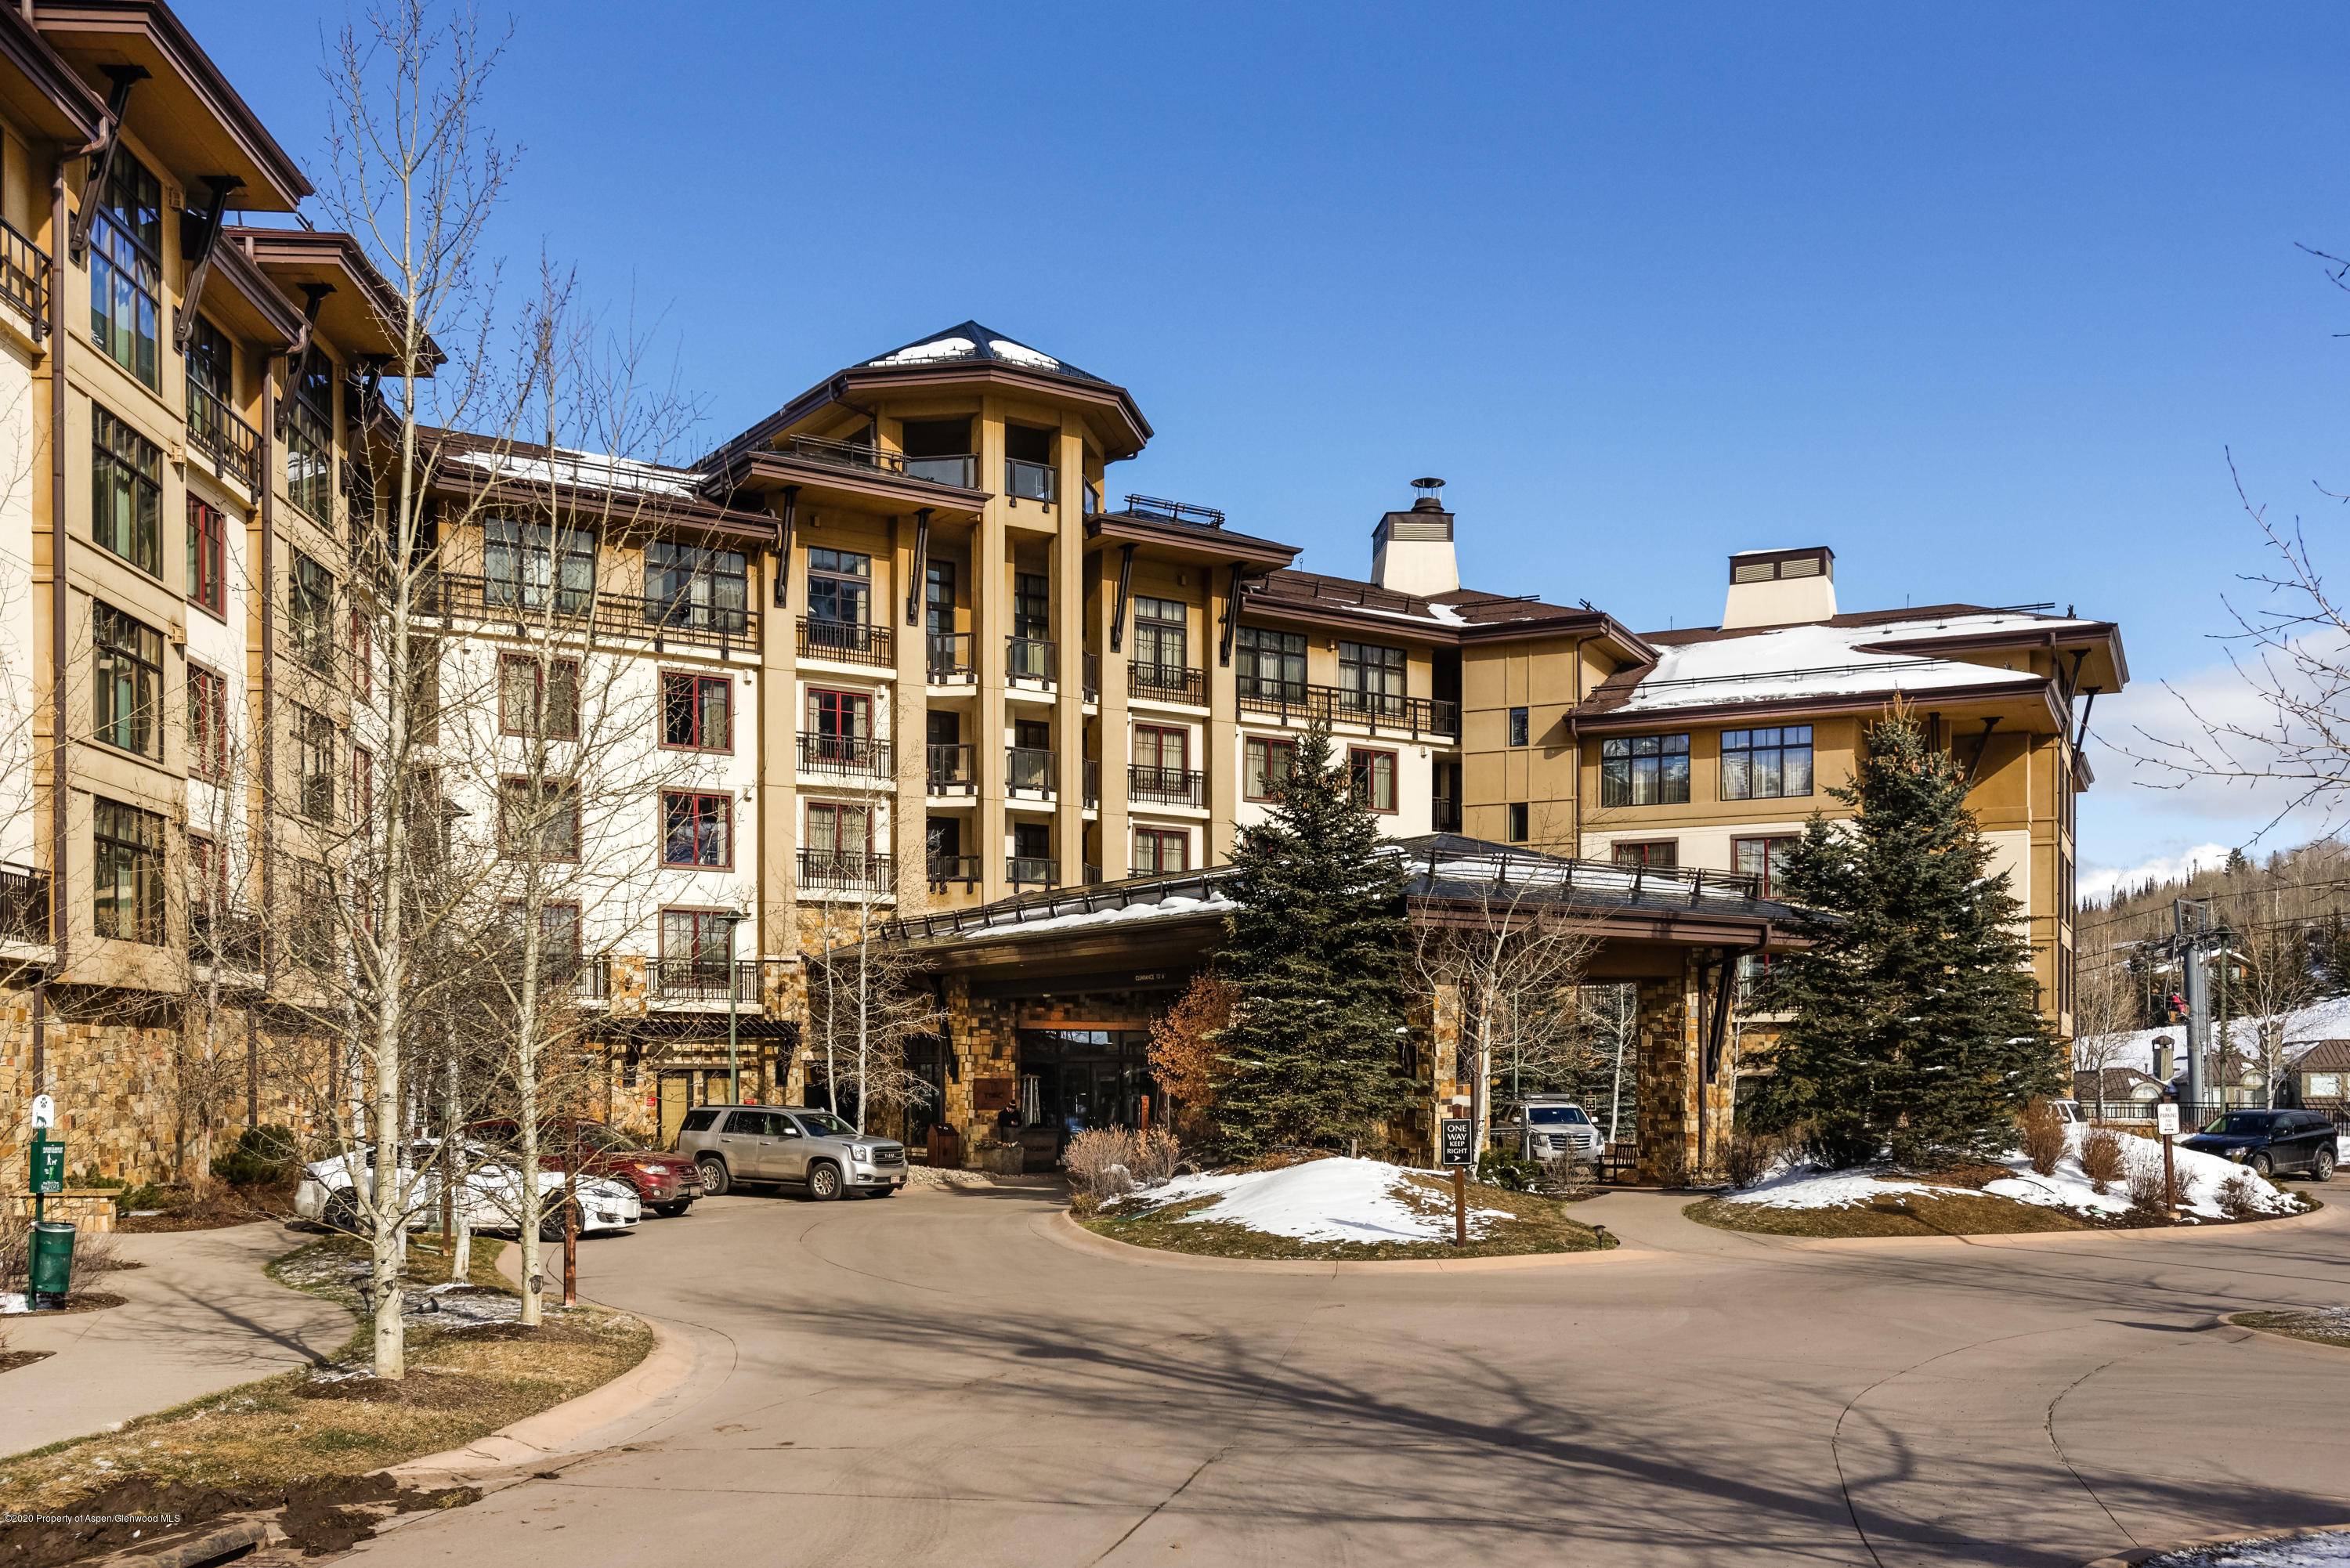 Amazing ski in ski out whole ownership opportunity in the only 4 star resort in Snowmass Village.